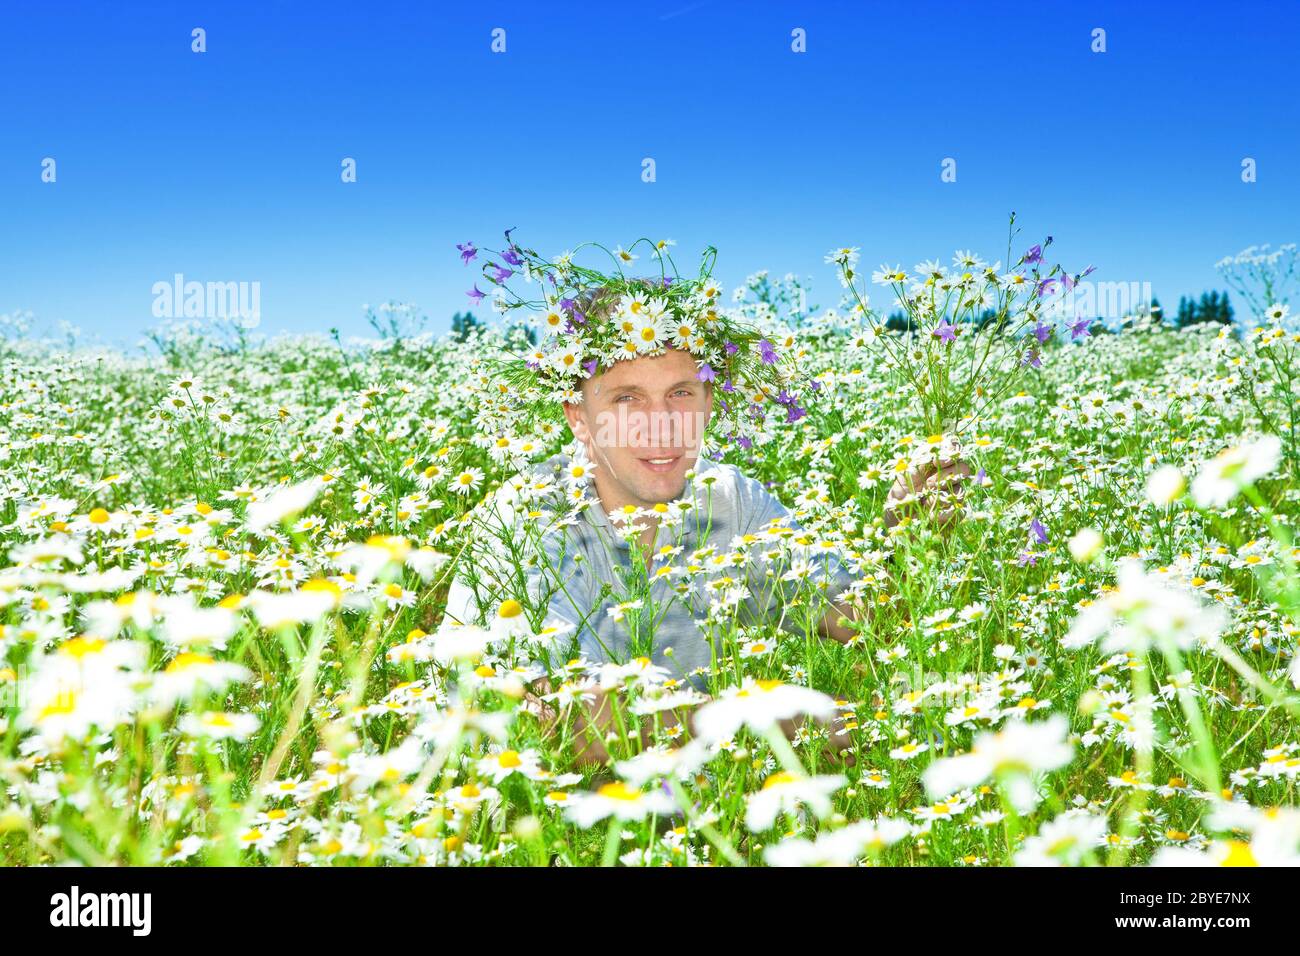 man in a wreath from wild flowers in the field Stock Photo